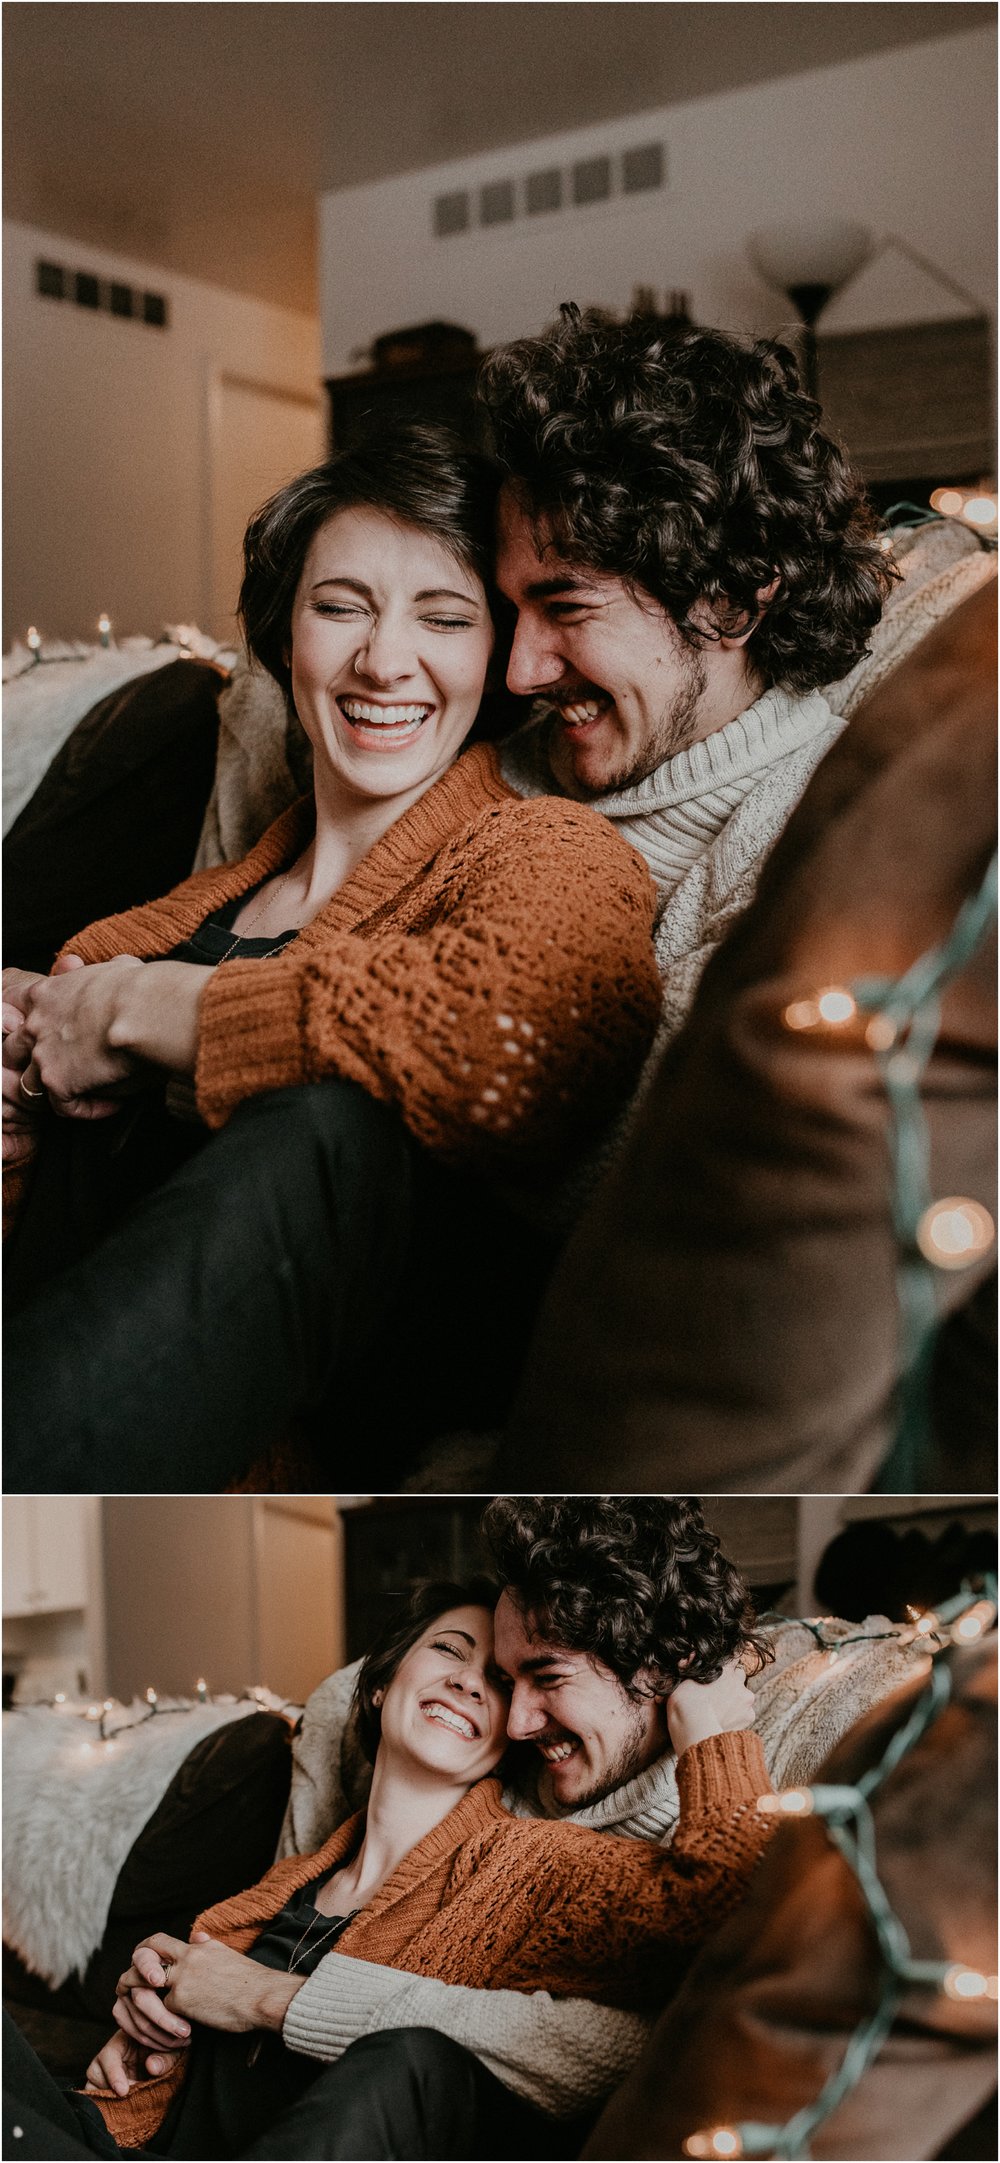 Boise Engagement Wedding Photographer Lifestyle Couples Session In home Dogs Christmas Winter Laughter Love